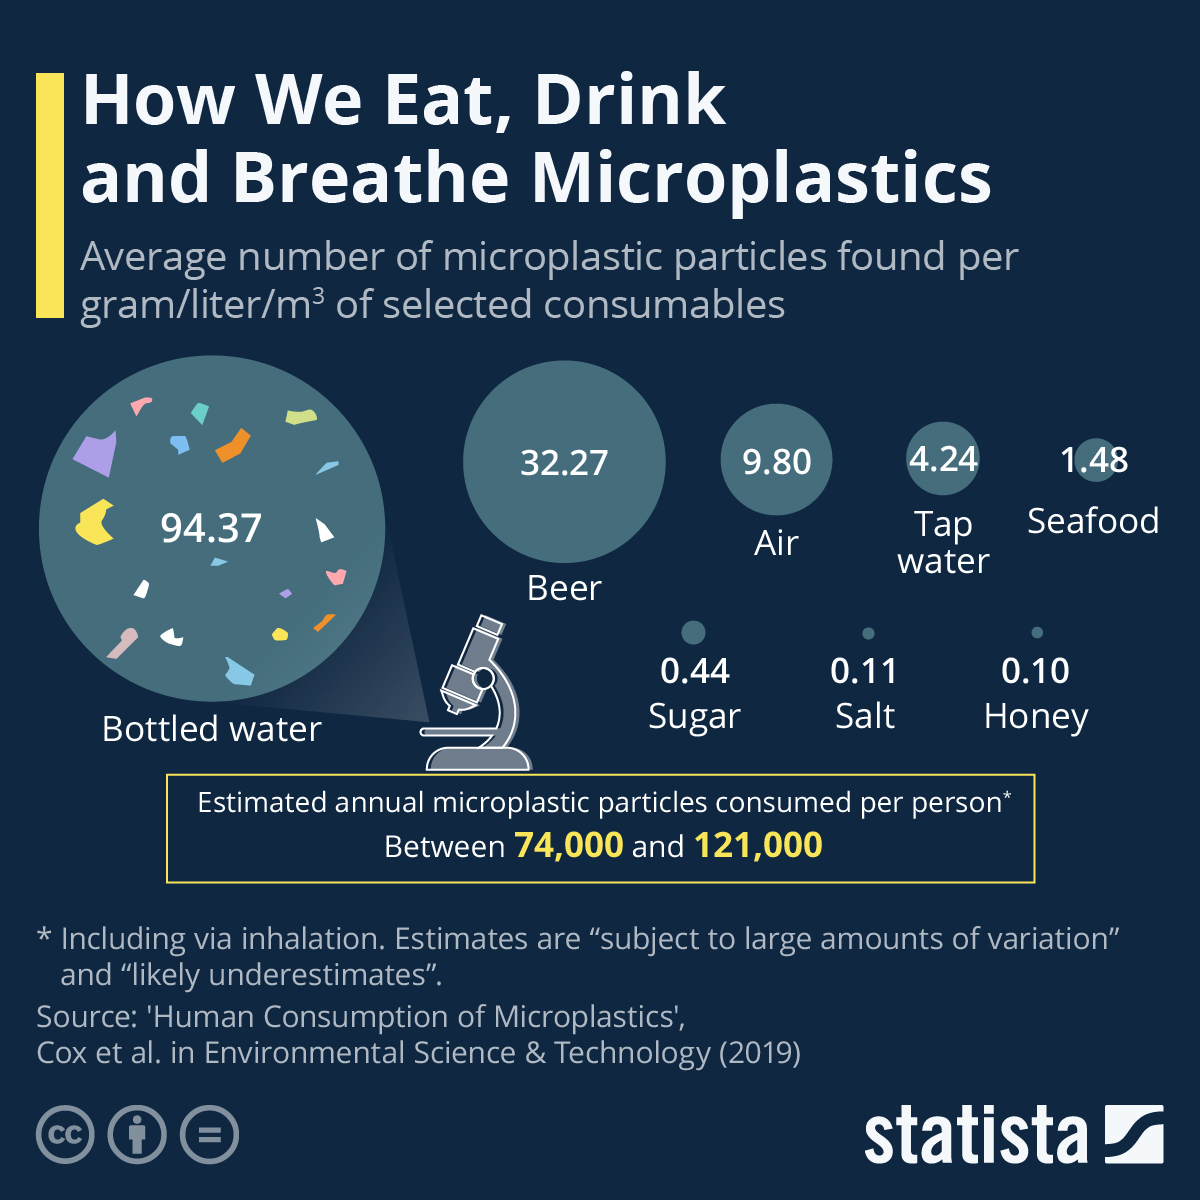 How We Eat, Drink and Breathe Microplastics